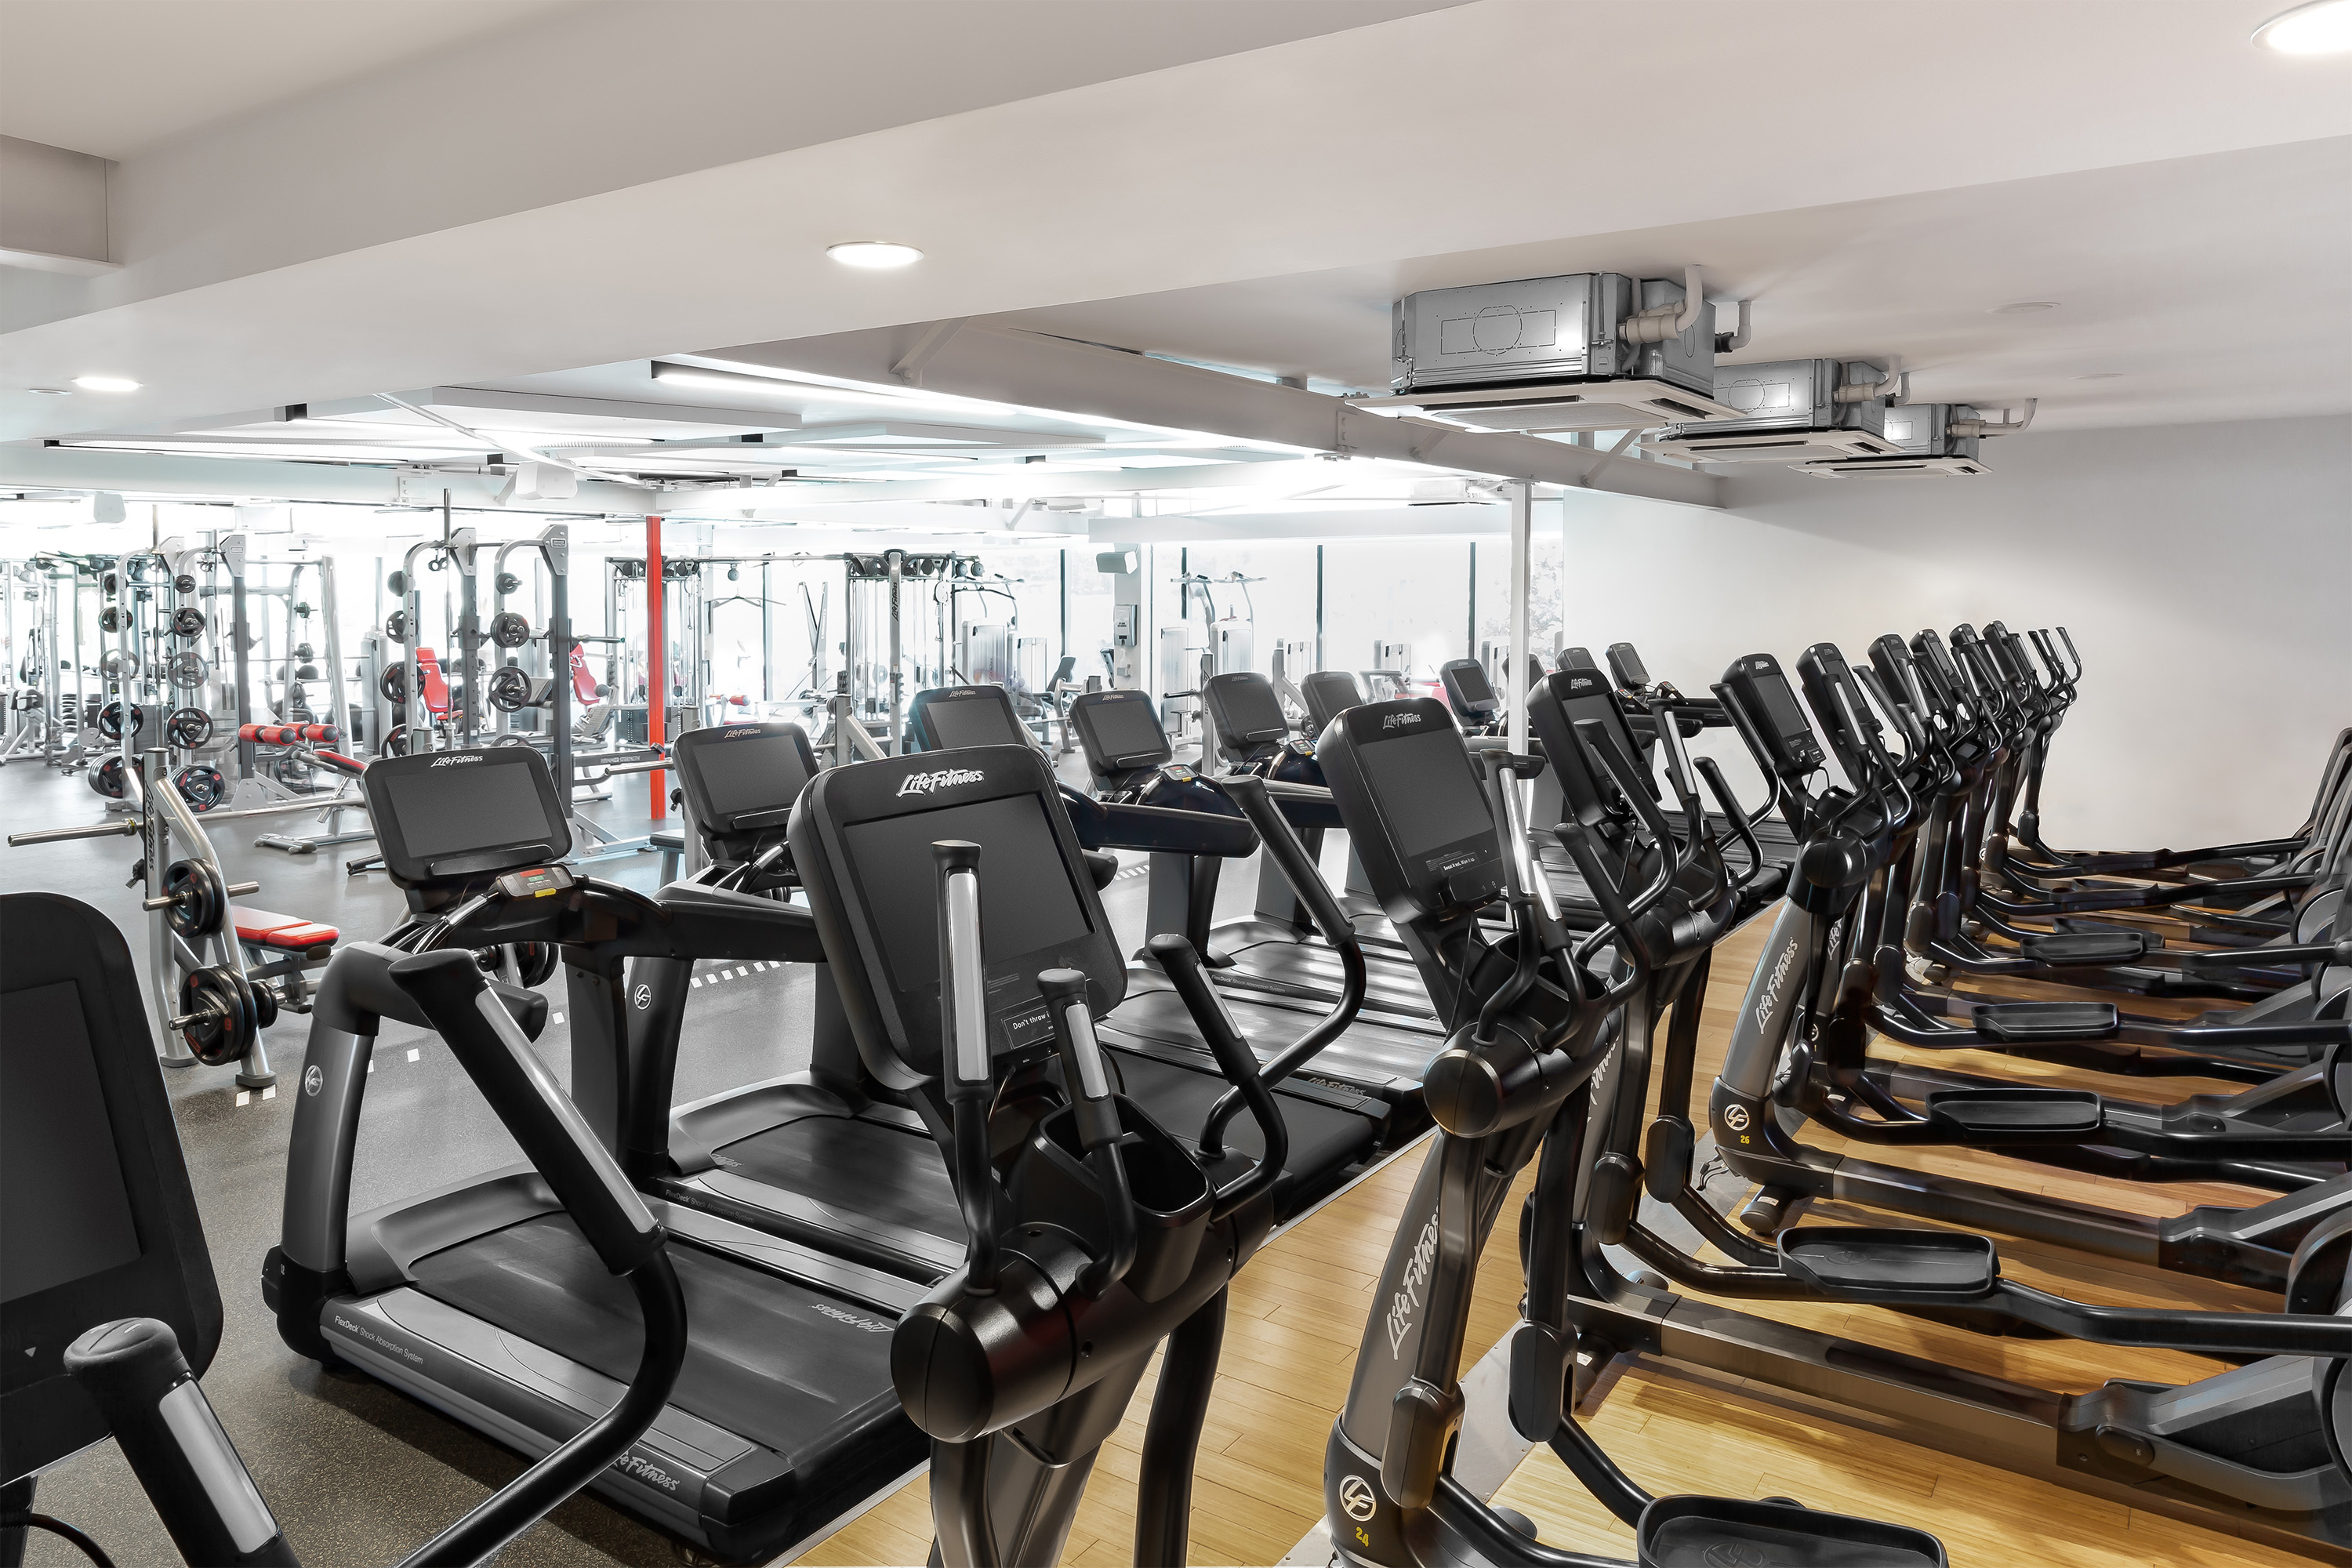 Les Mills Newmarket, The Home Of Fitness